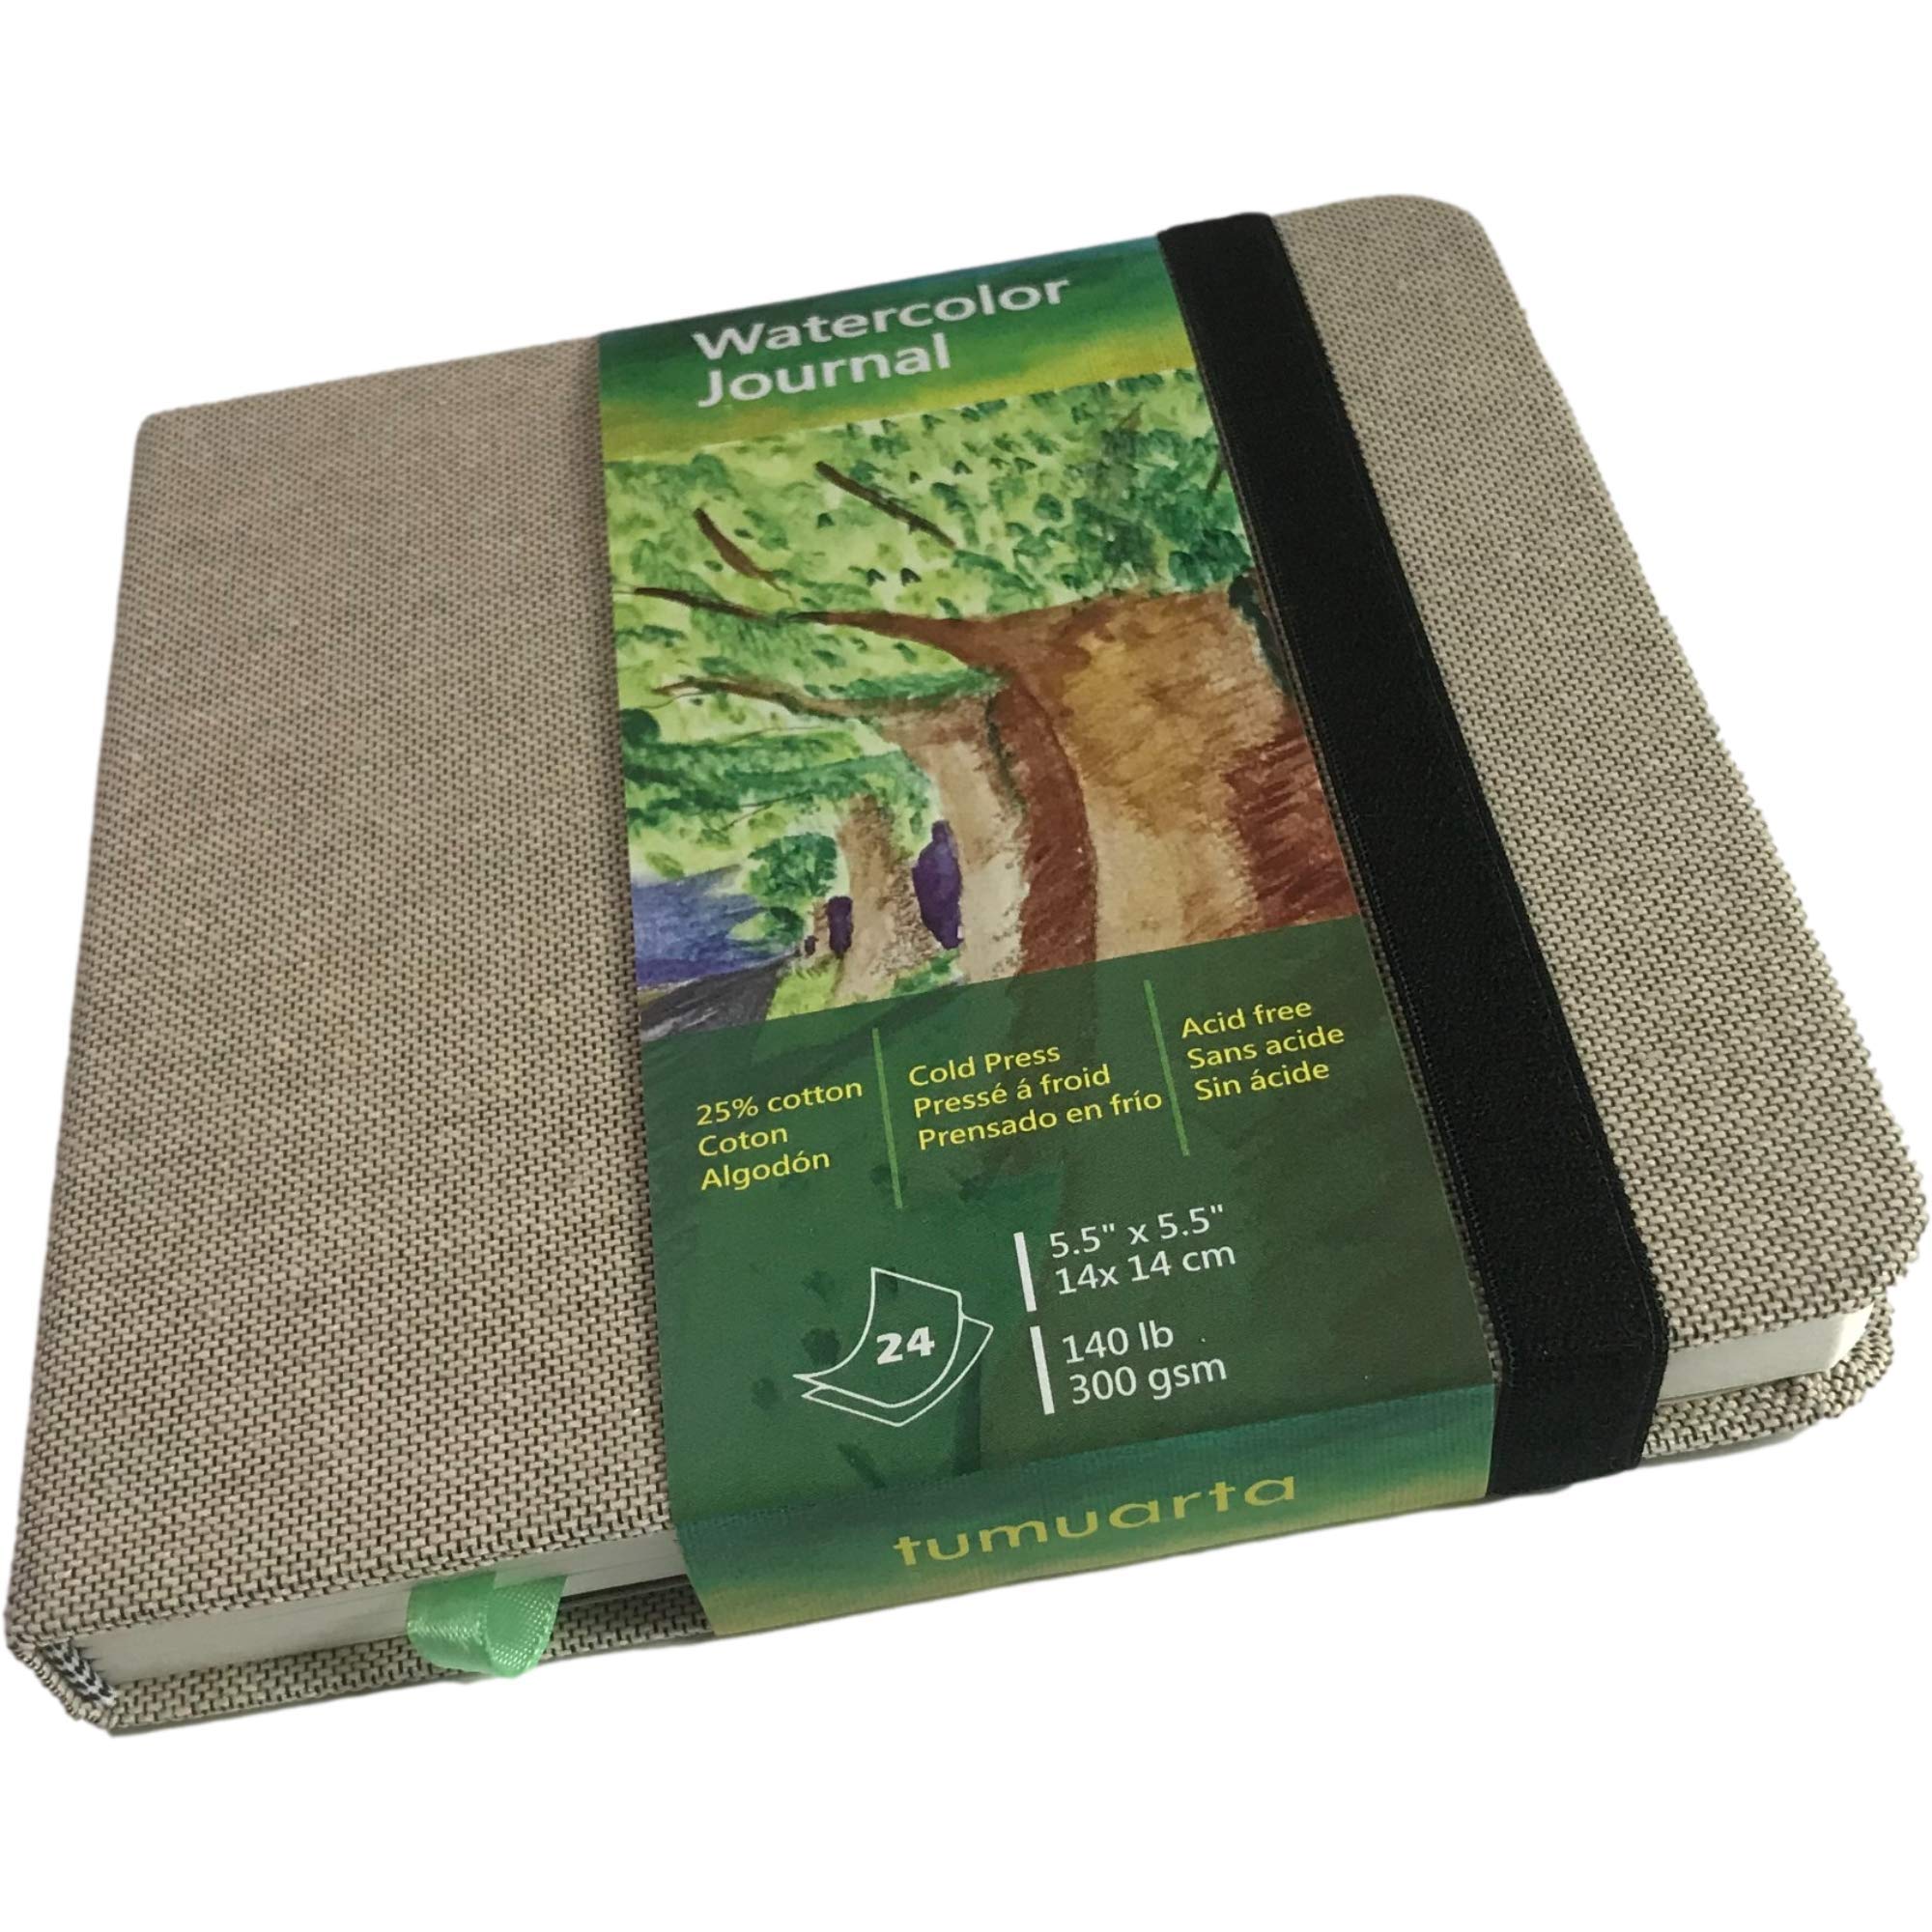 tumuarta Square Watercolor Journal,140 LB,300 GSM,5.5X5.5, Cotton  Paper,Cold Press,24 Sheets, Watercolor Paper Sketchbooks for Use As Travel  Notebook